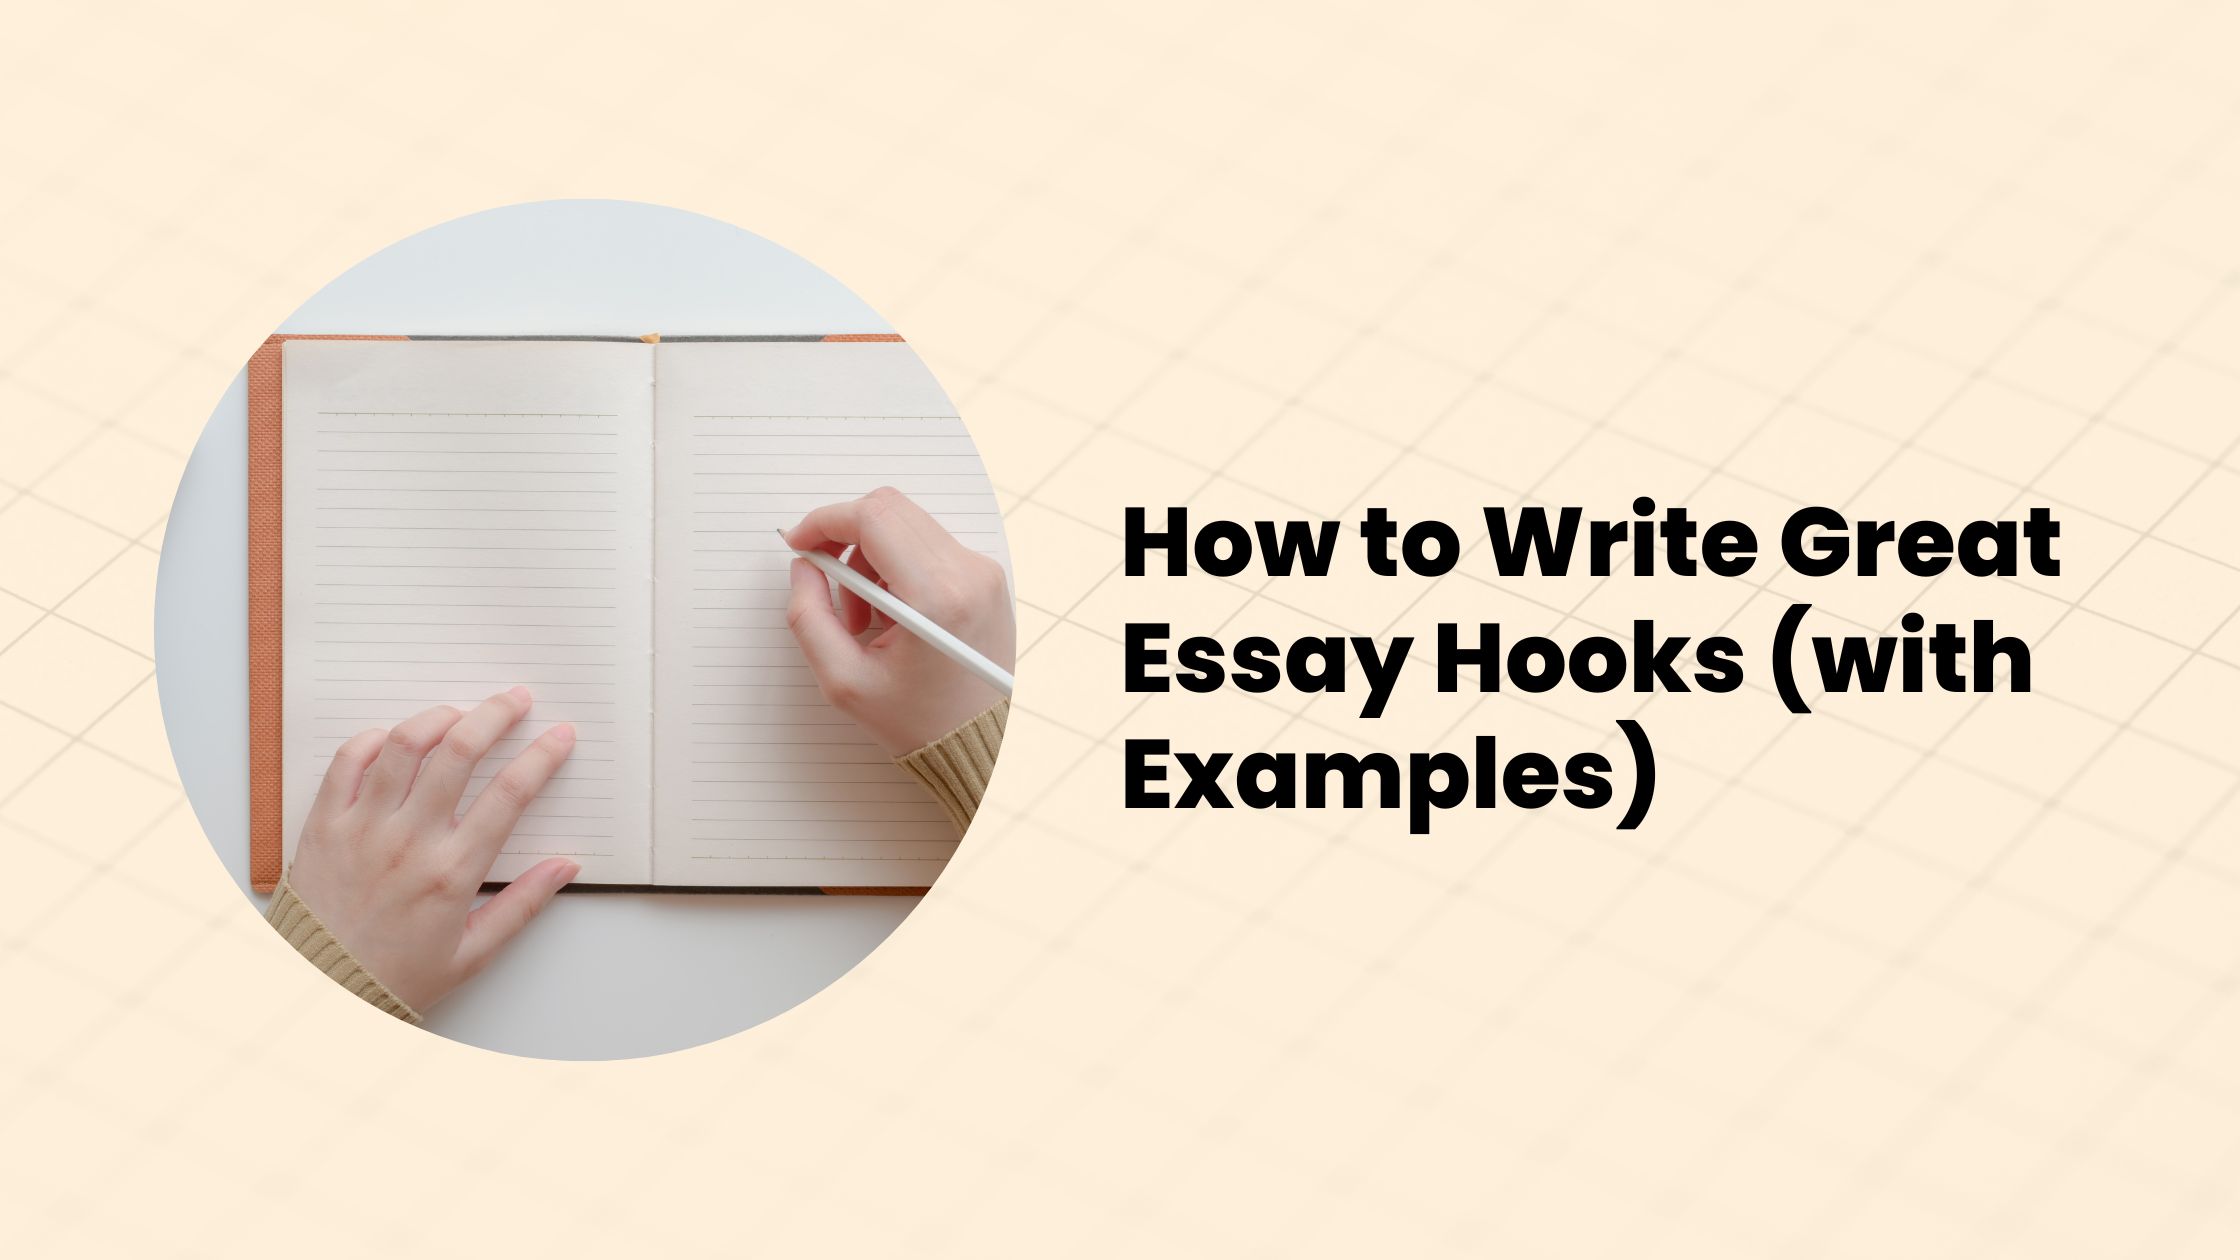 How To Write A Great Essay Hook (With Examples) - Smodin Blog